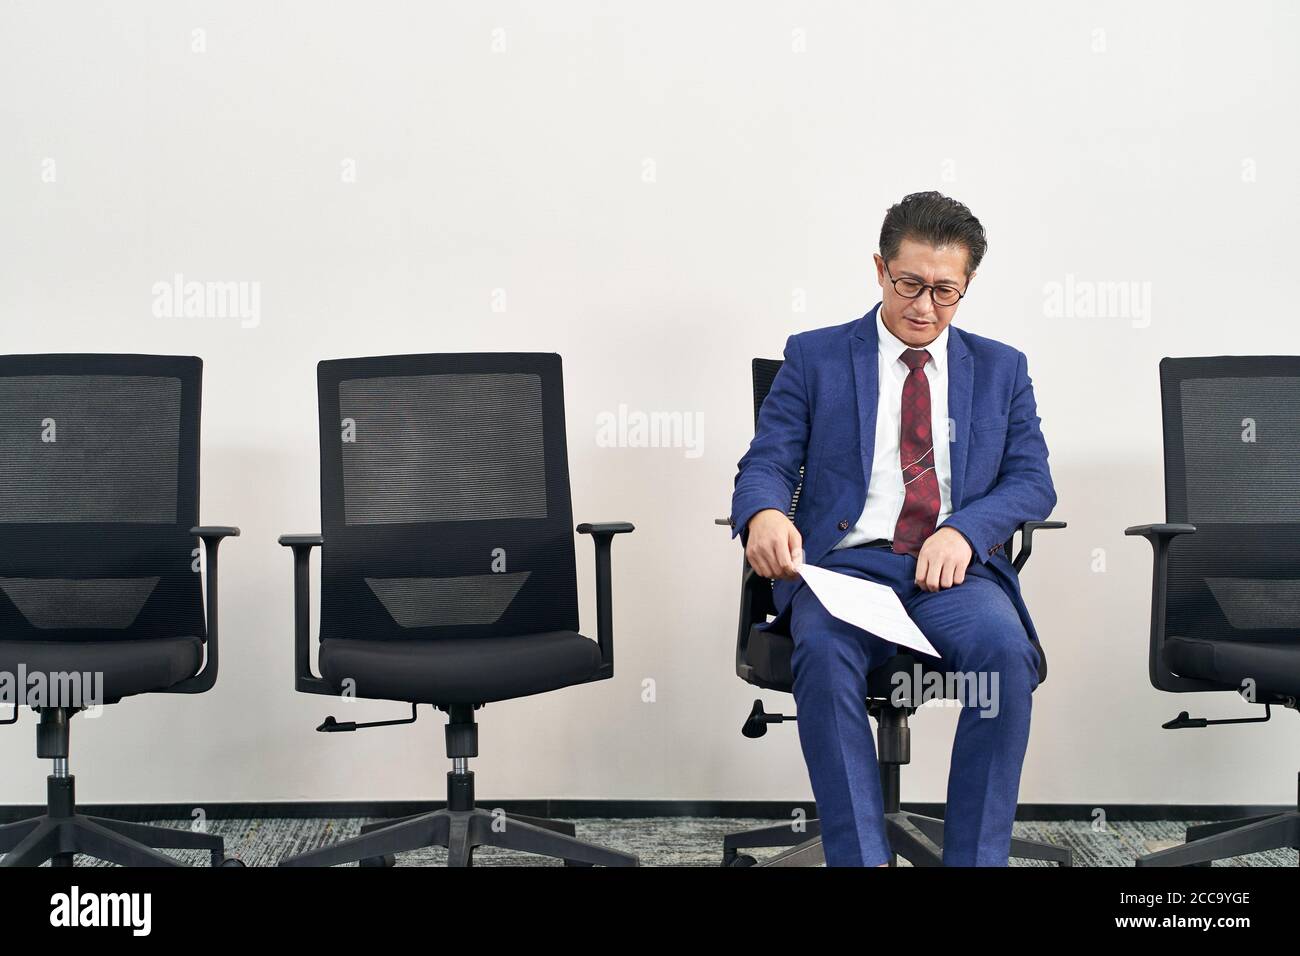 older asian job seeker sitting in chair appears to be frustrated and defeated Stock Photo